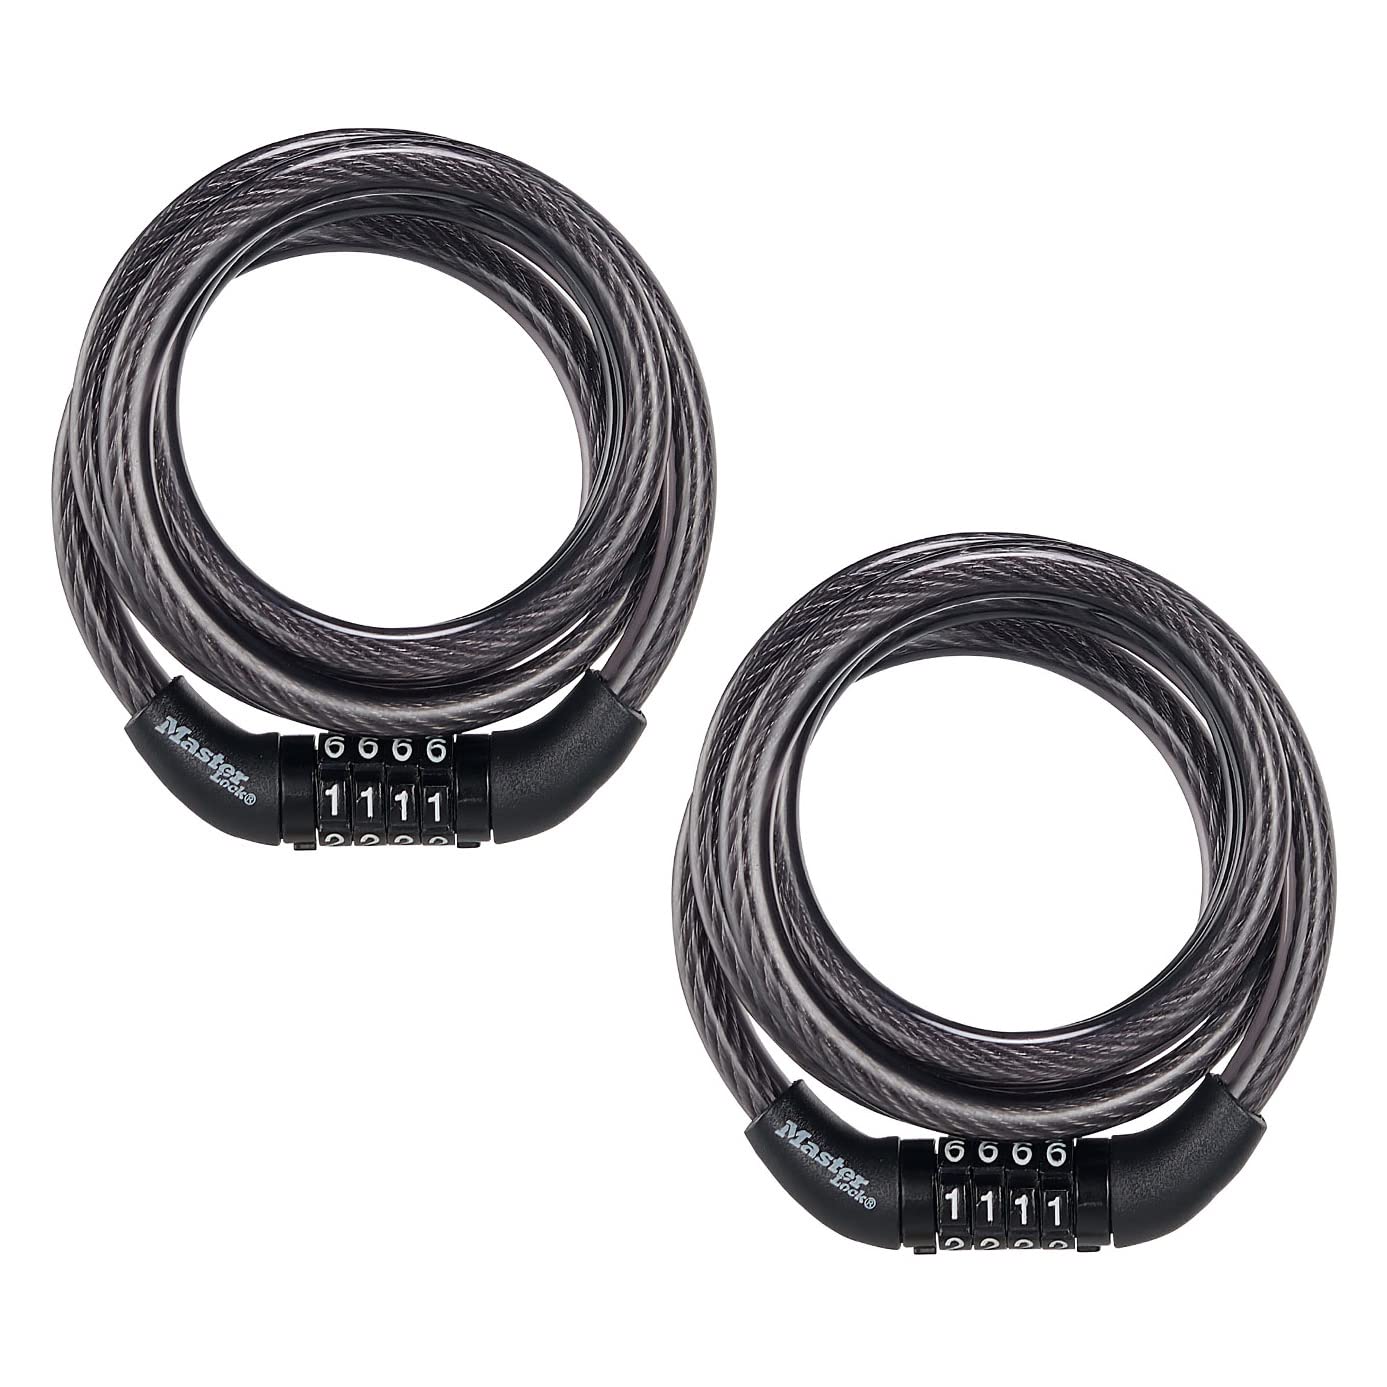 Master Lock Bike Lock Cable, Combination Bicycle Lock, Cable Lock for Outdoor Equipment, 2 Pack, 8143T,Black